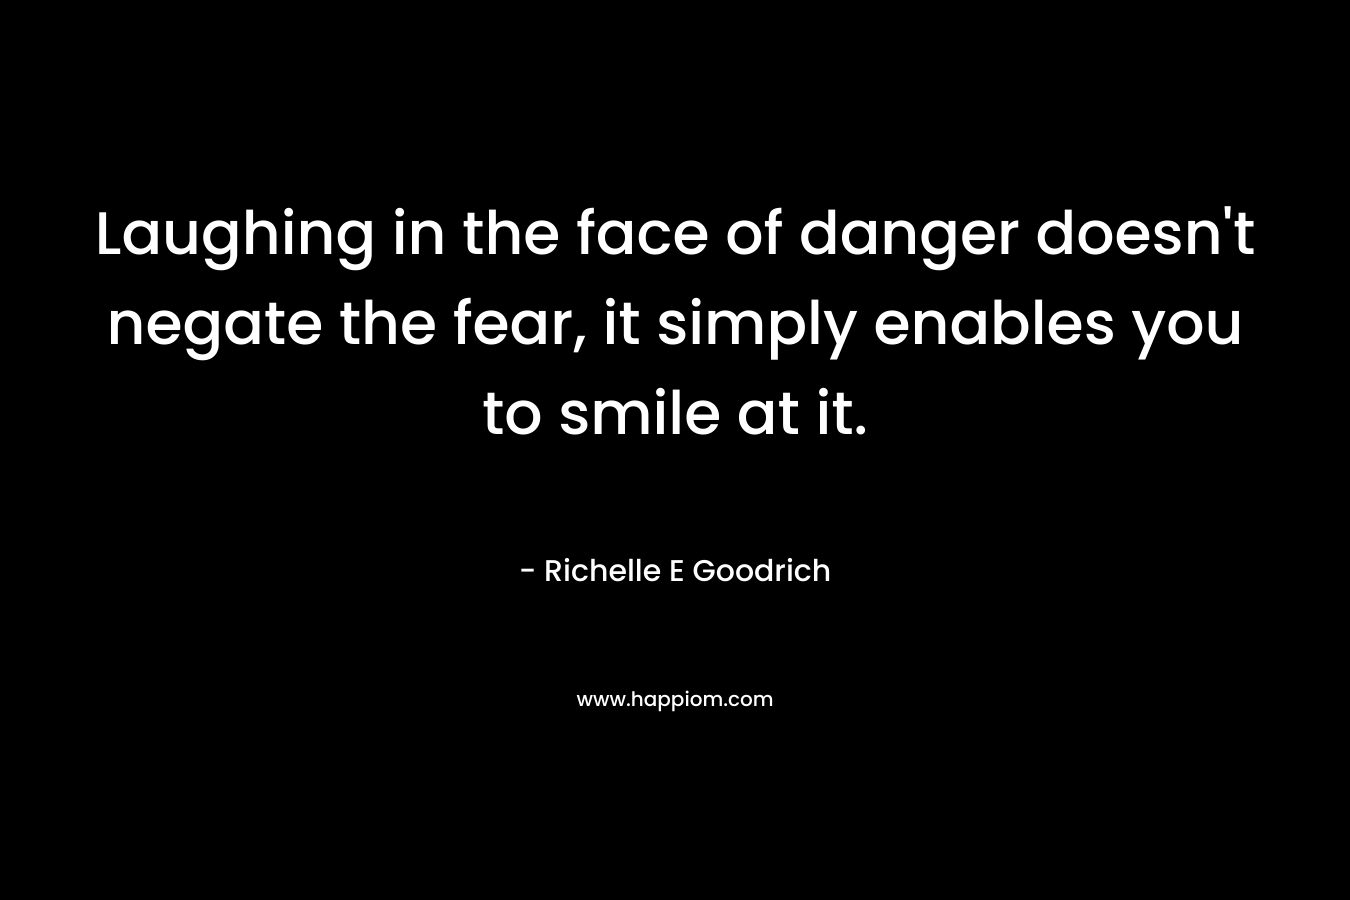 Laughing in the face of danger doesn't negate the fear, it simply enables you to smile at it.